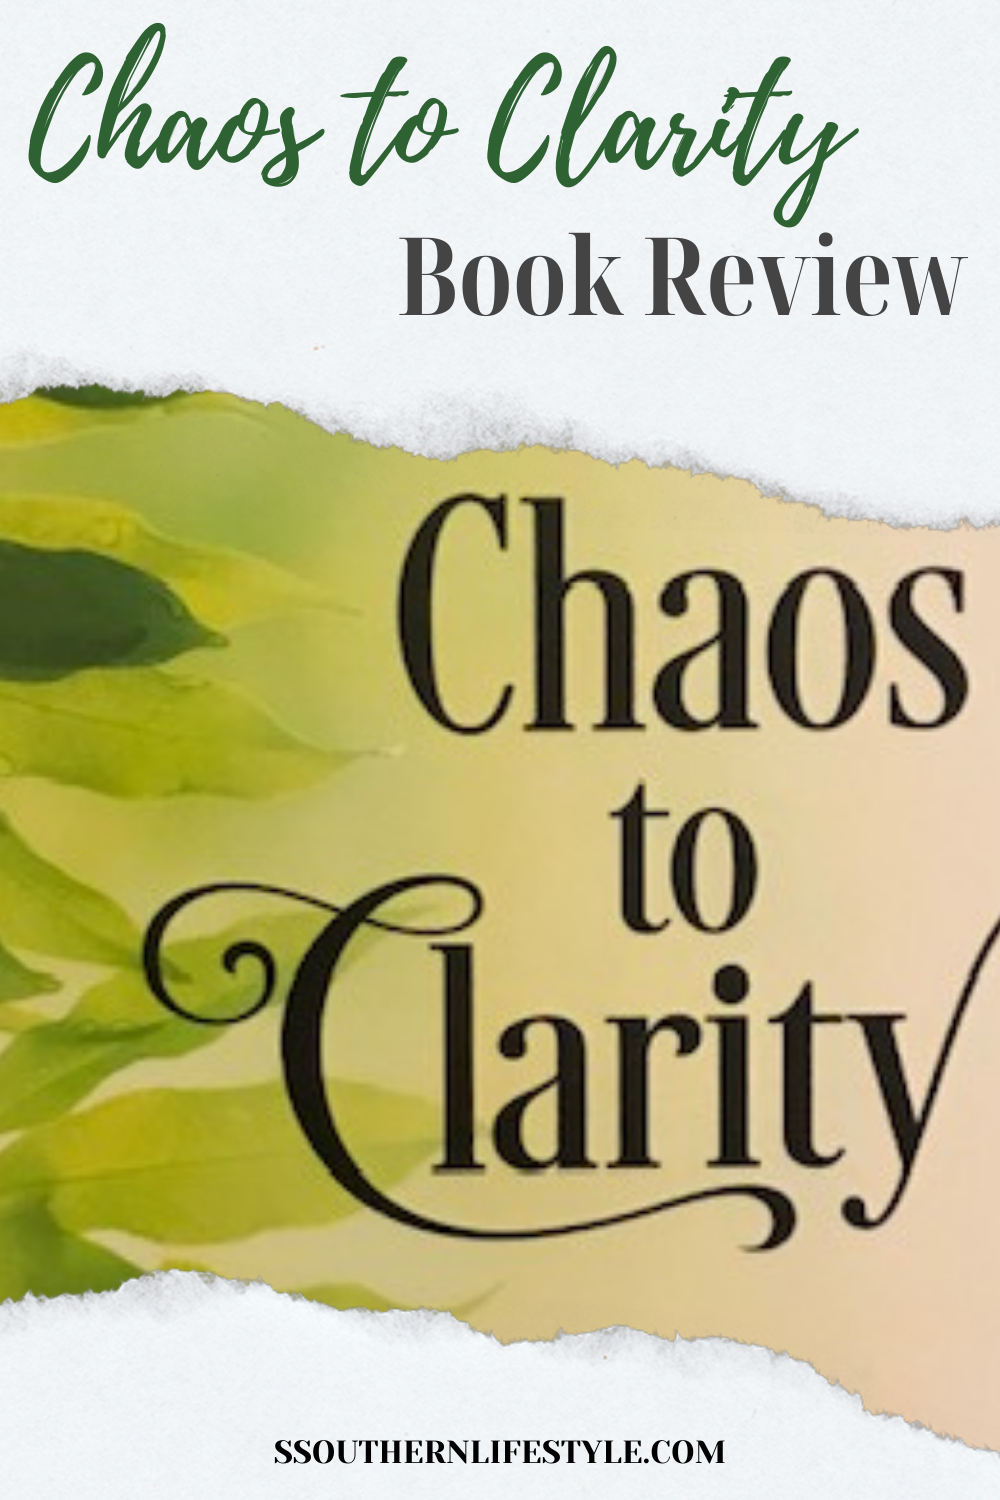 Nonfiction inspirational book review chaos to clarity